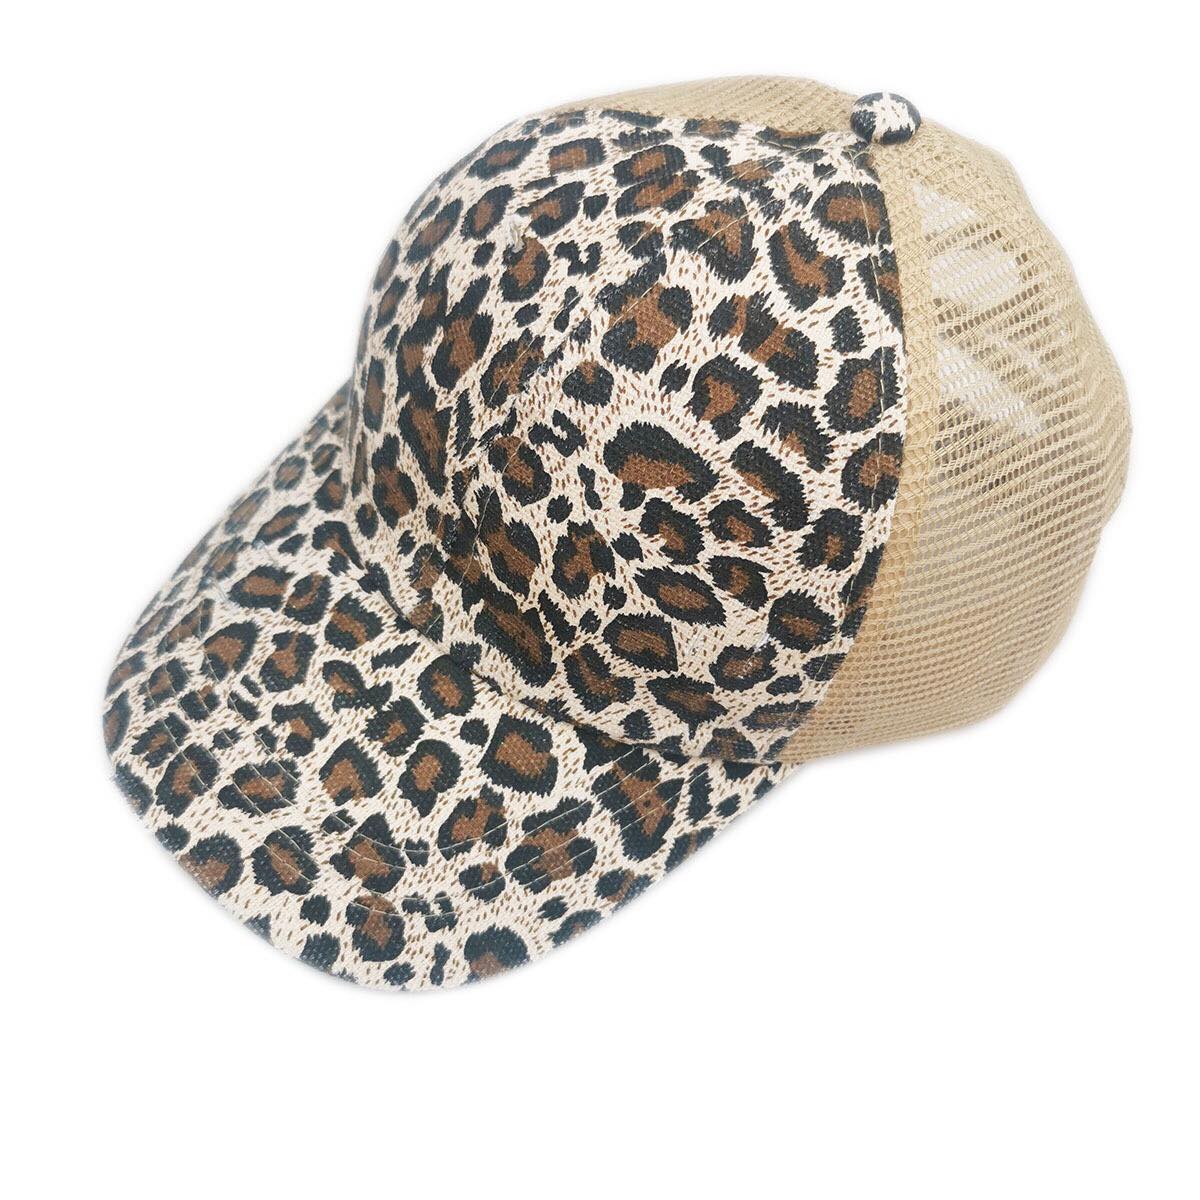 CRISS CROSS DISTRESSED VINTAGE TRUCKER HATS  WASHED CANVAS LEOPARD LADIES  CAPS